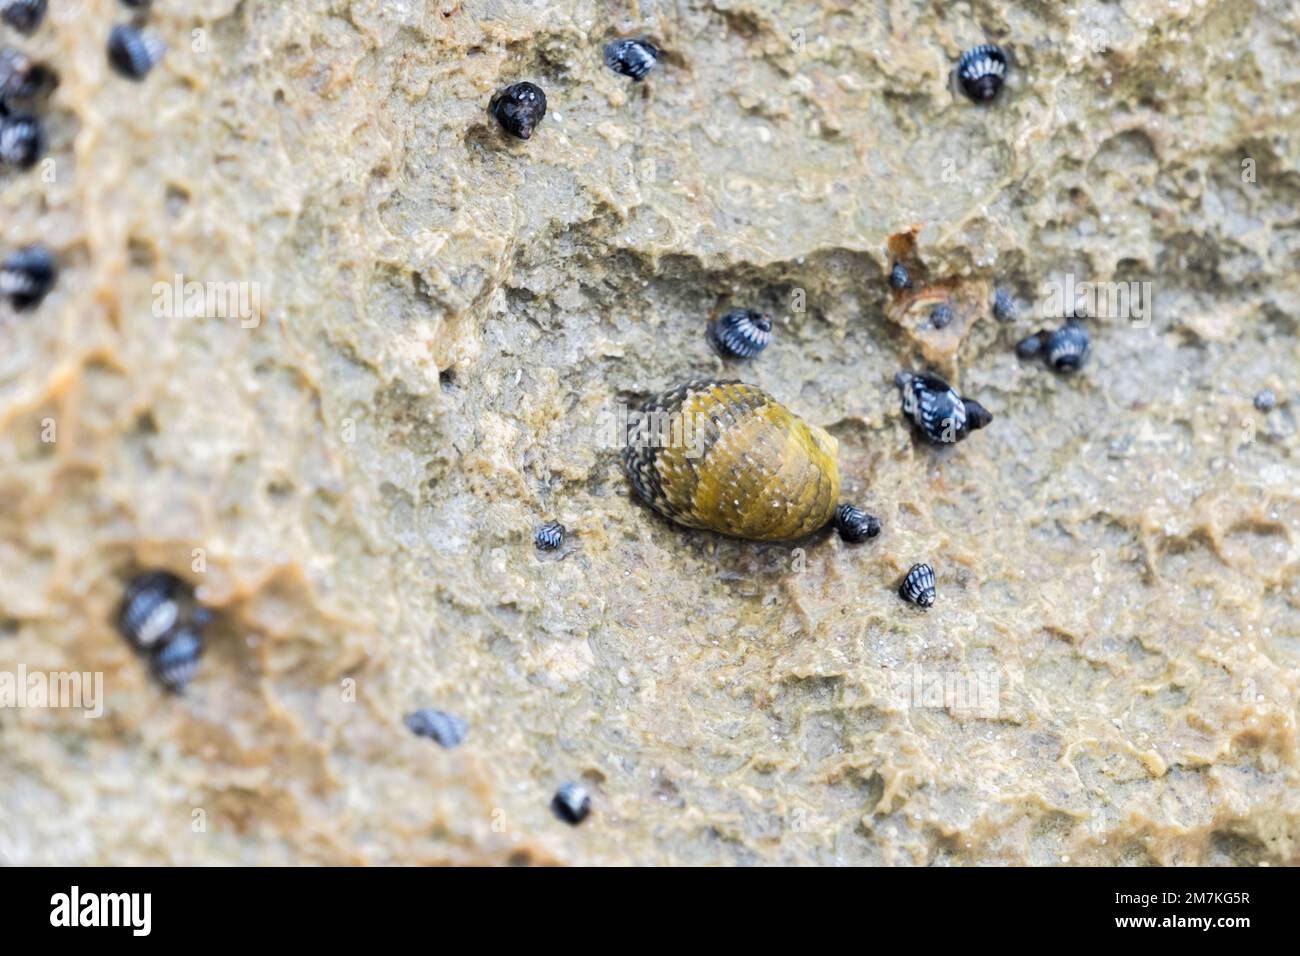 Details of hundreds of small dark blue sea snails attached to a rock in the Limestone Bay area of Anguilla Stock Photo